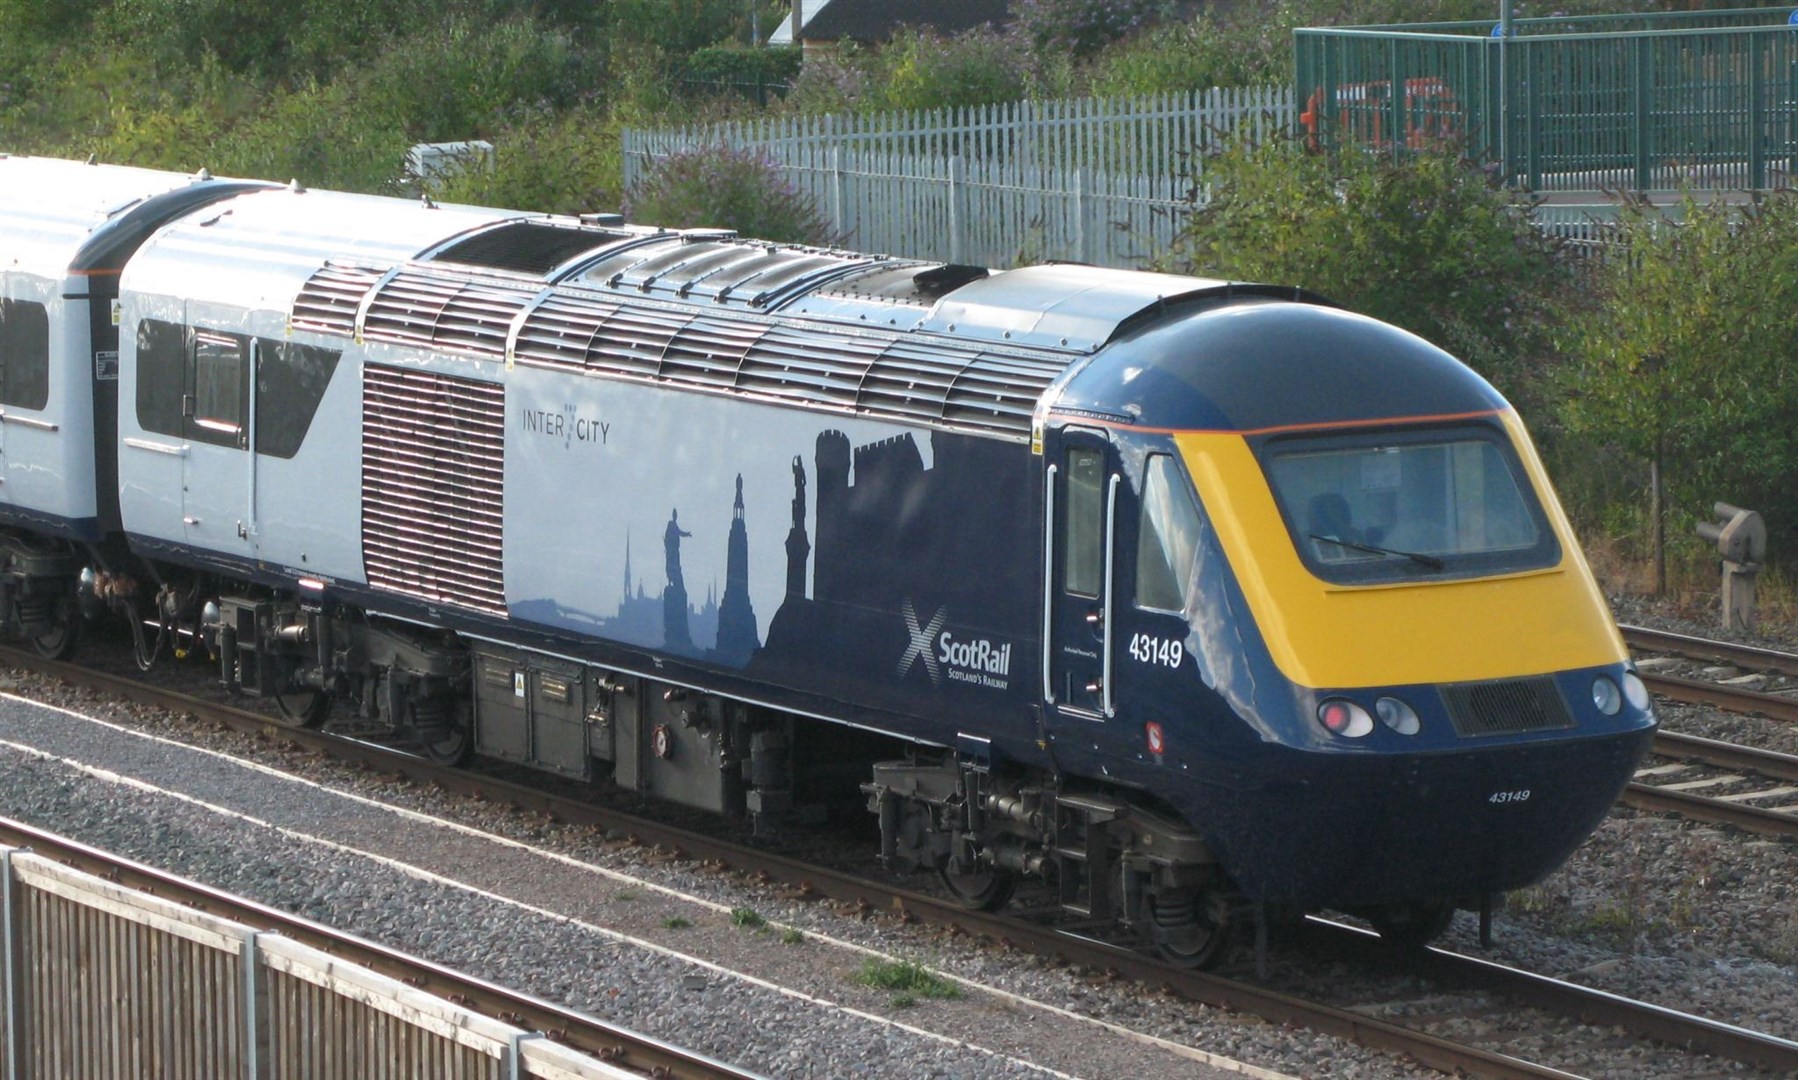 ScotRail services will operate as normal during strike action days. Picture: Geof Sheppard, via Wikimedia Commons.